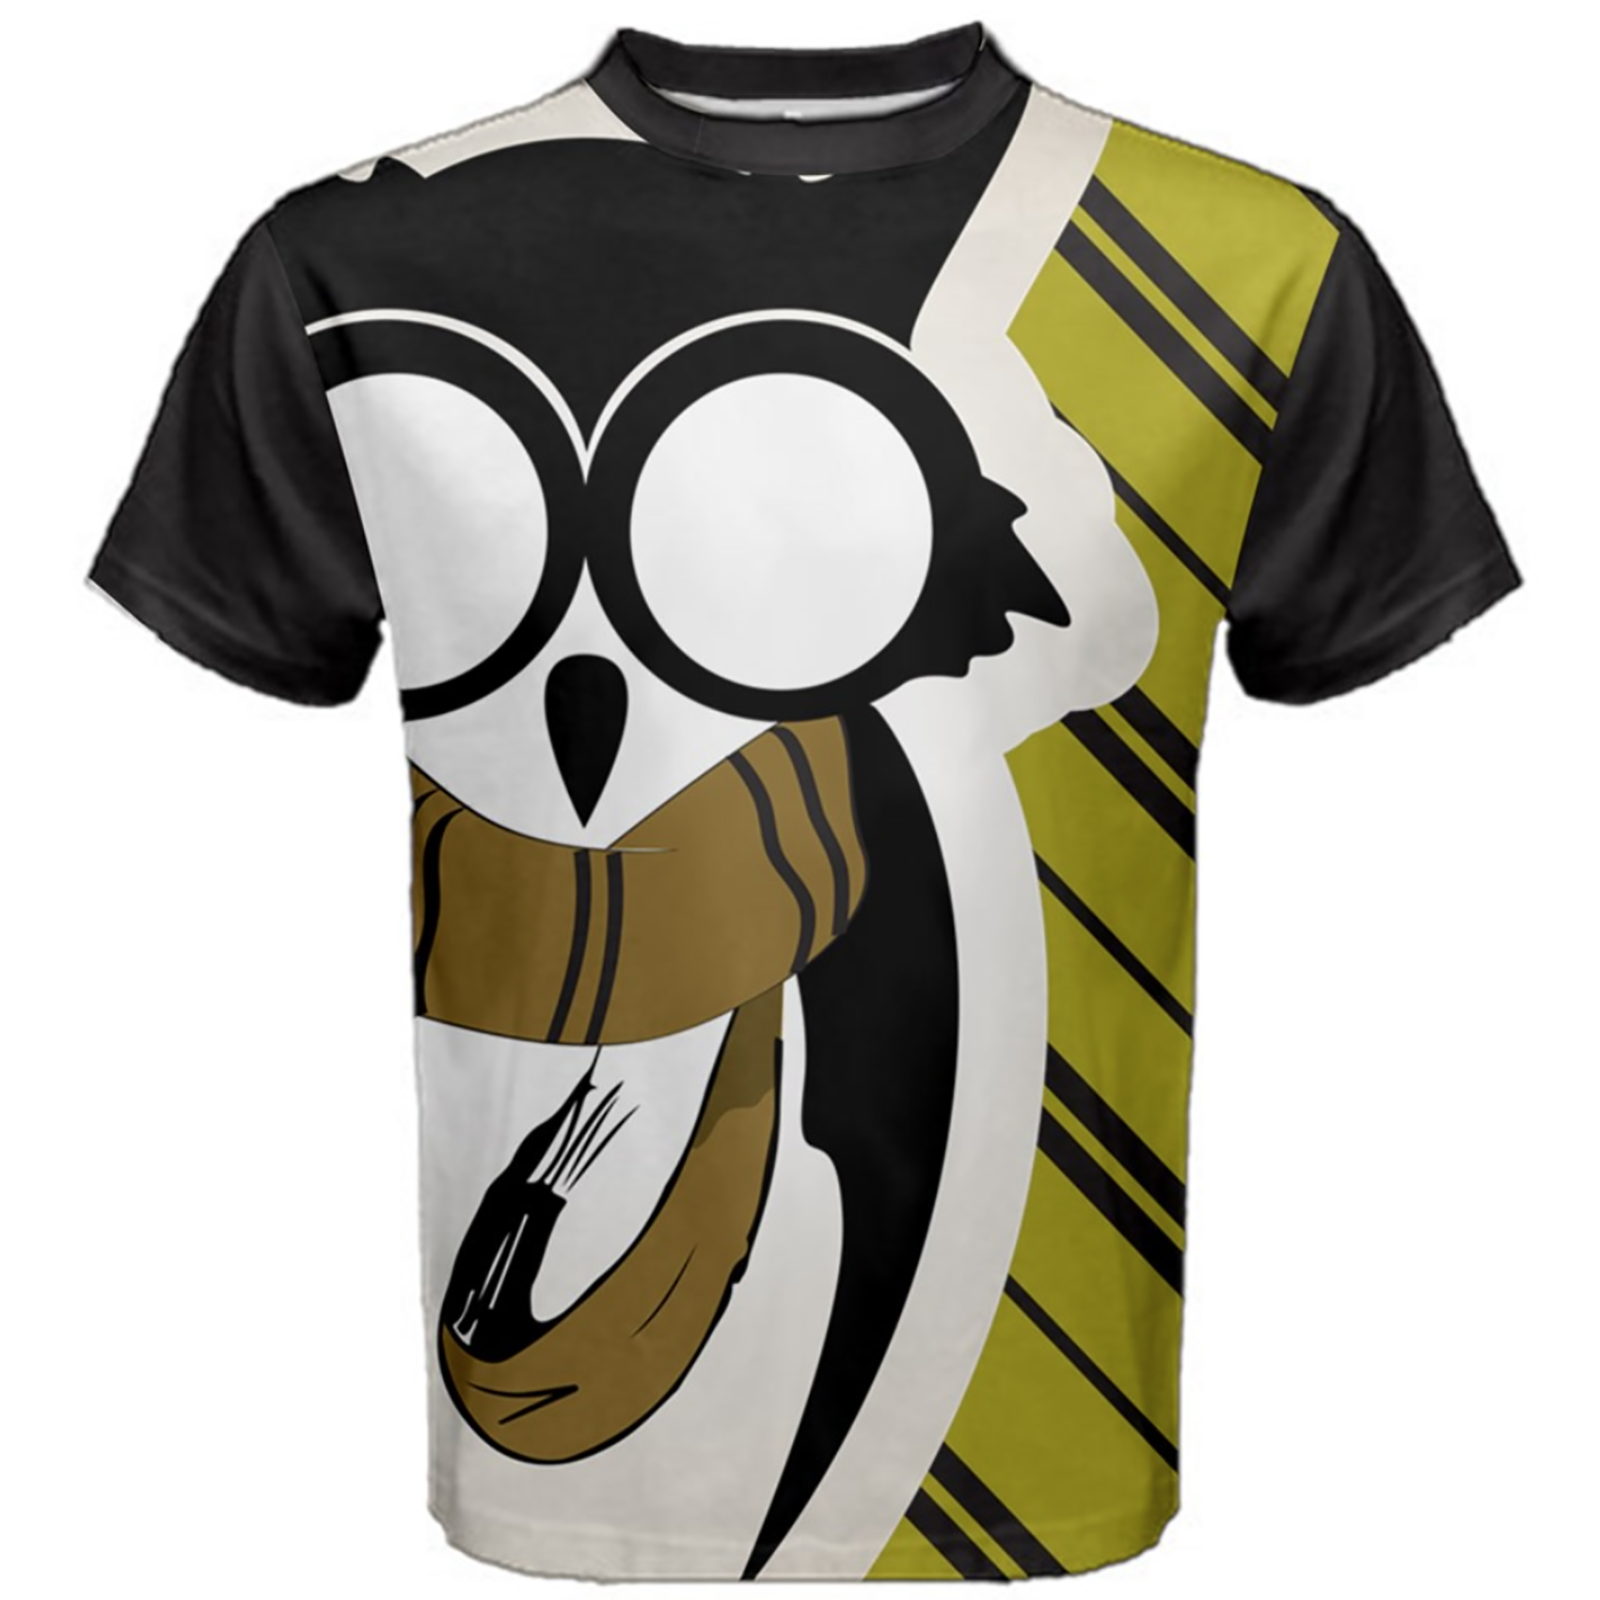 Owl Striped (Unisex) Cotton Tee - Inspired by Hufflepuff House